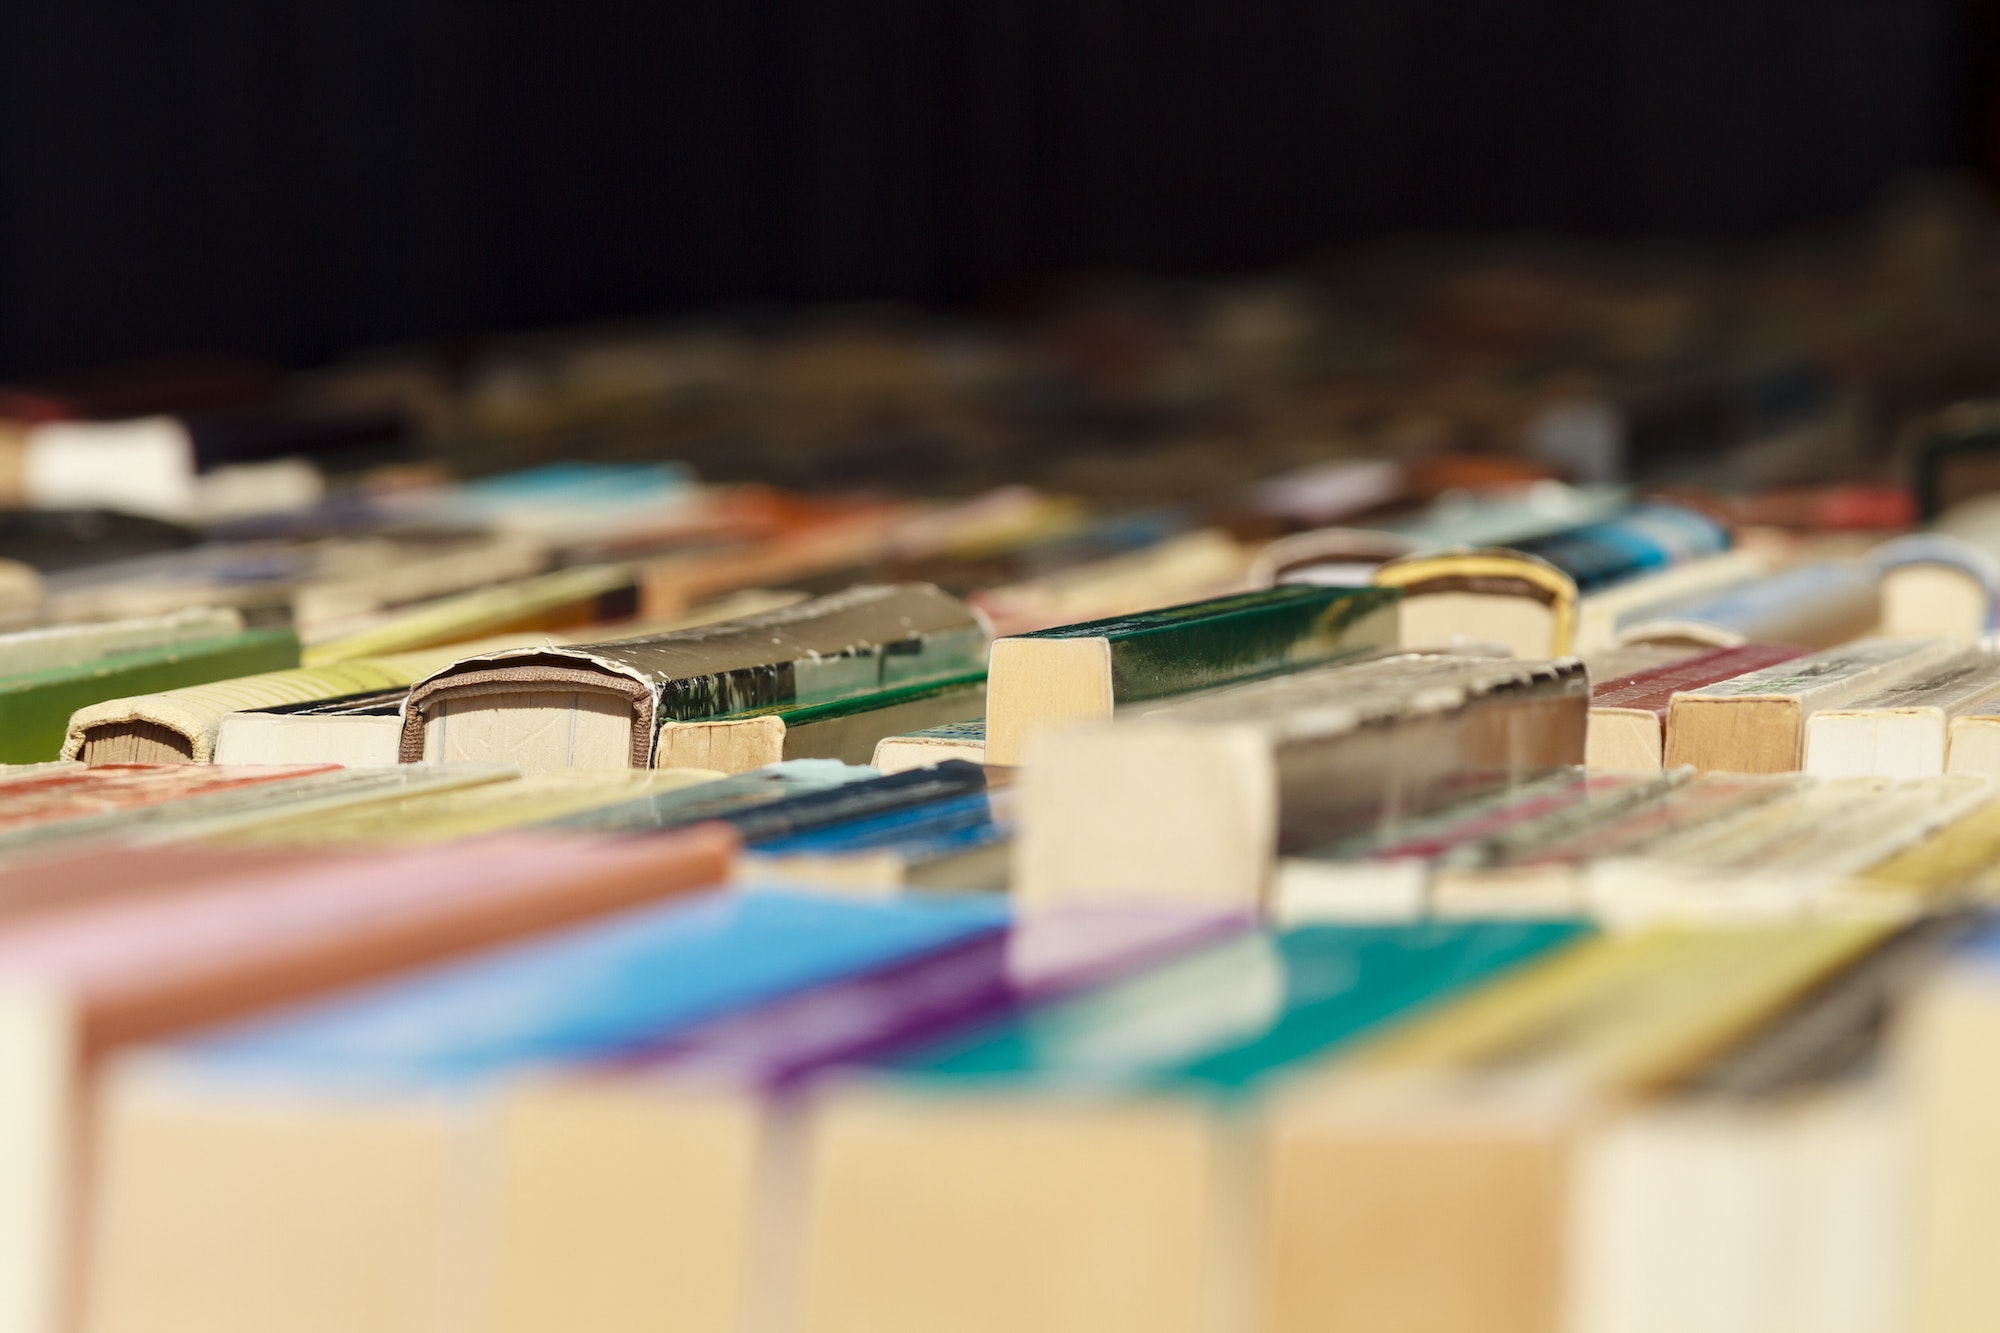 Used second hand books for sale on a book market stall in perspective bright colors on a table.